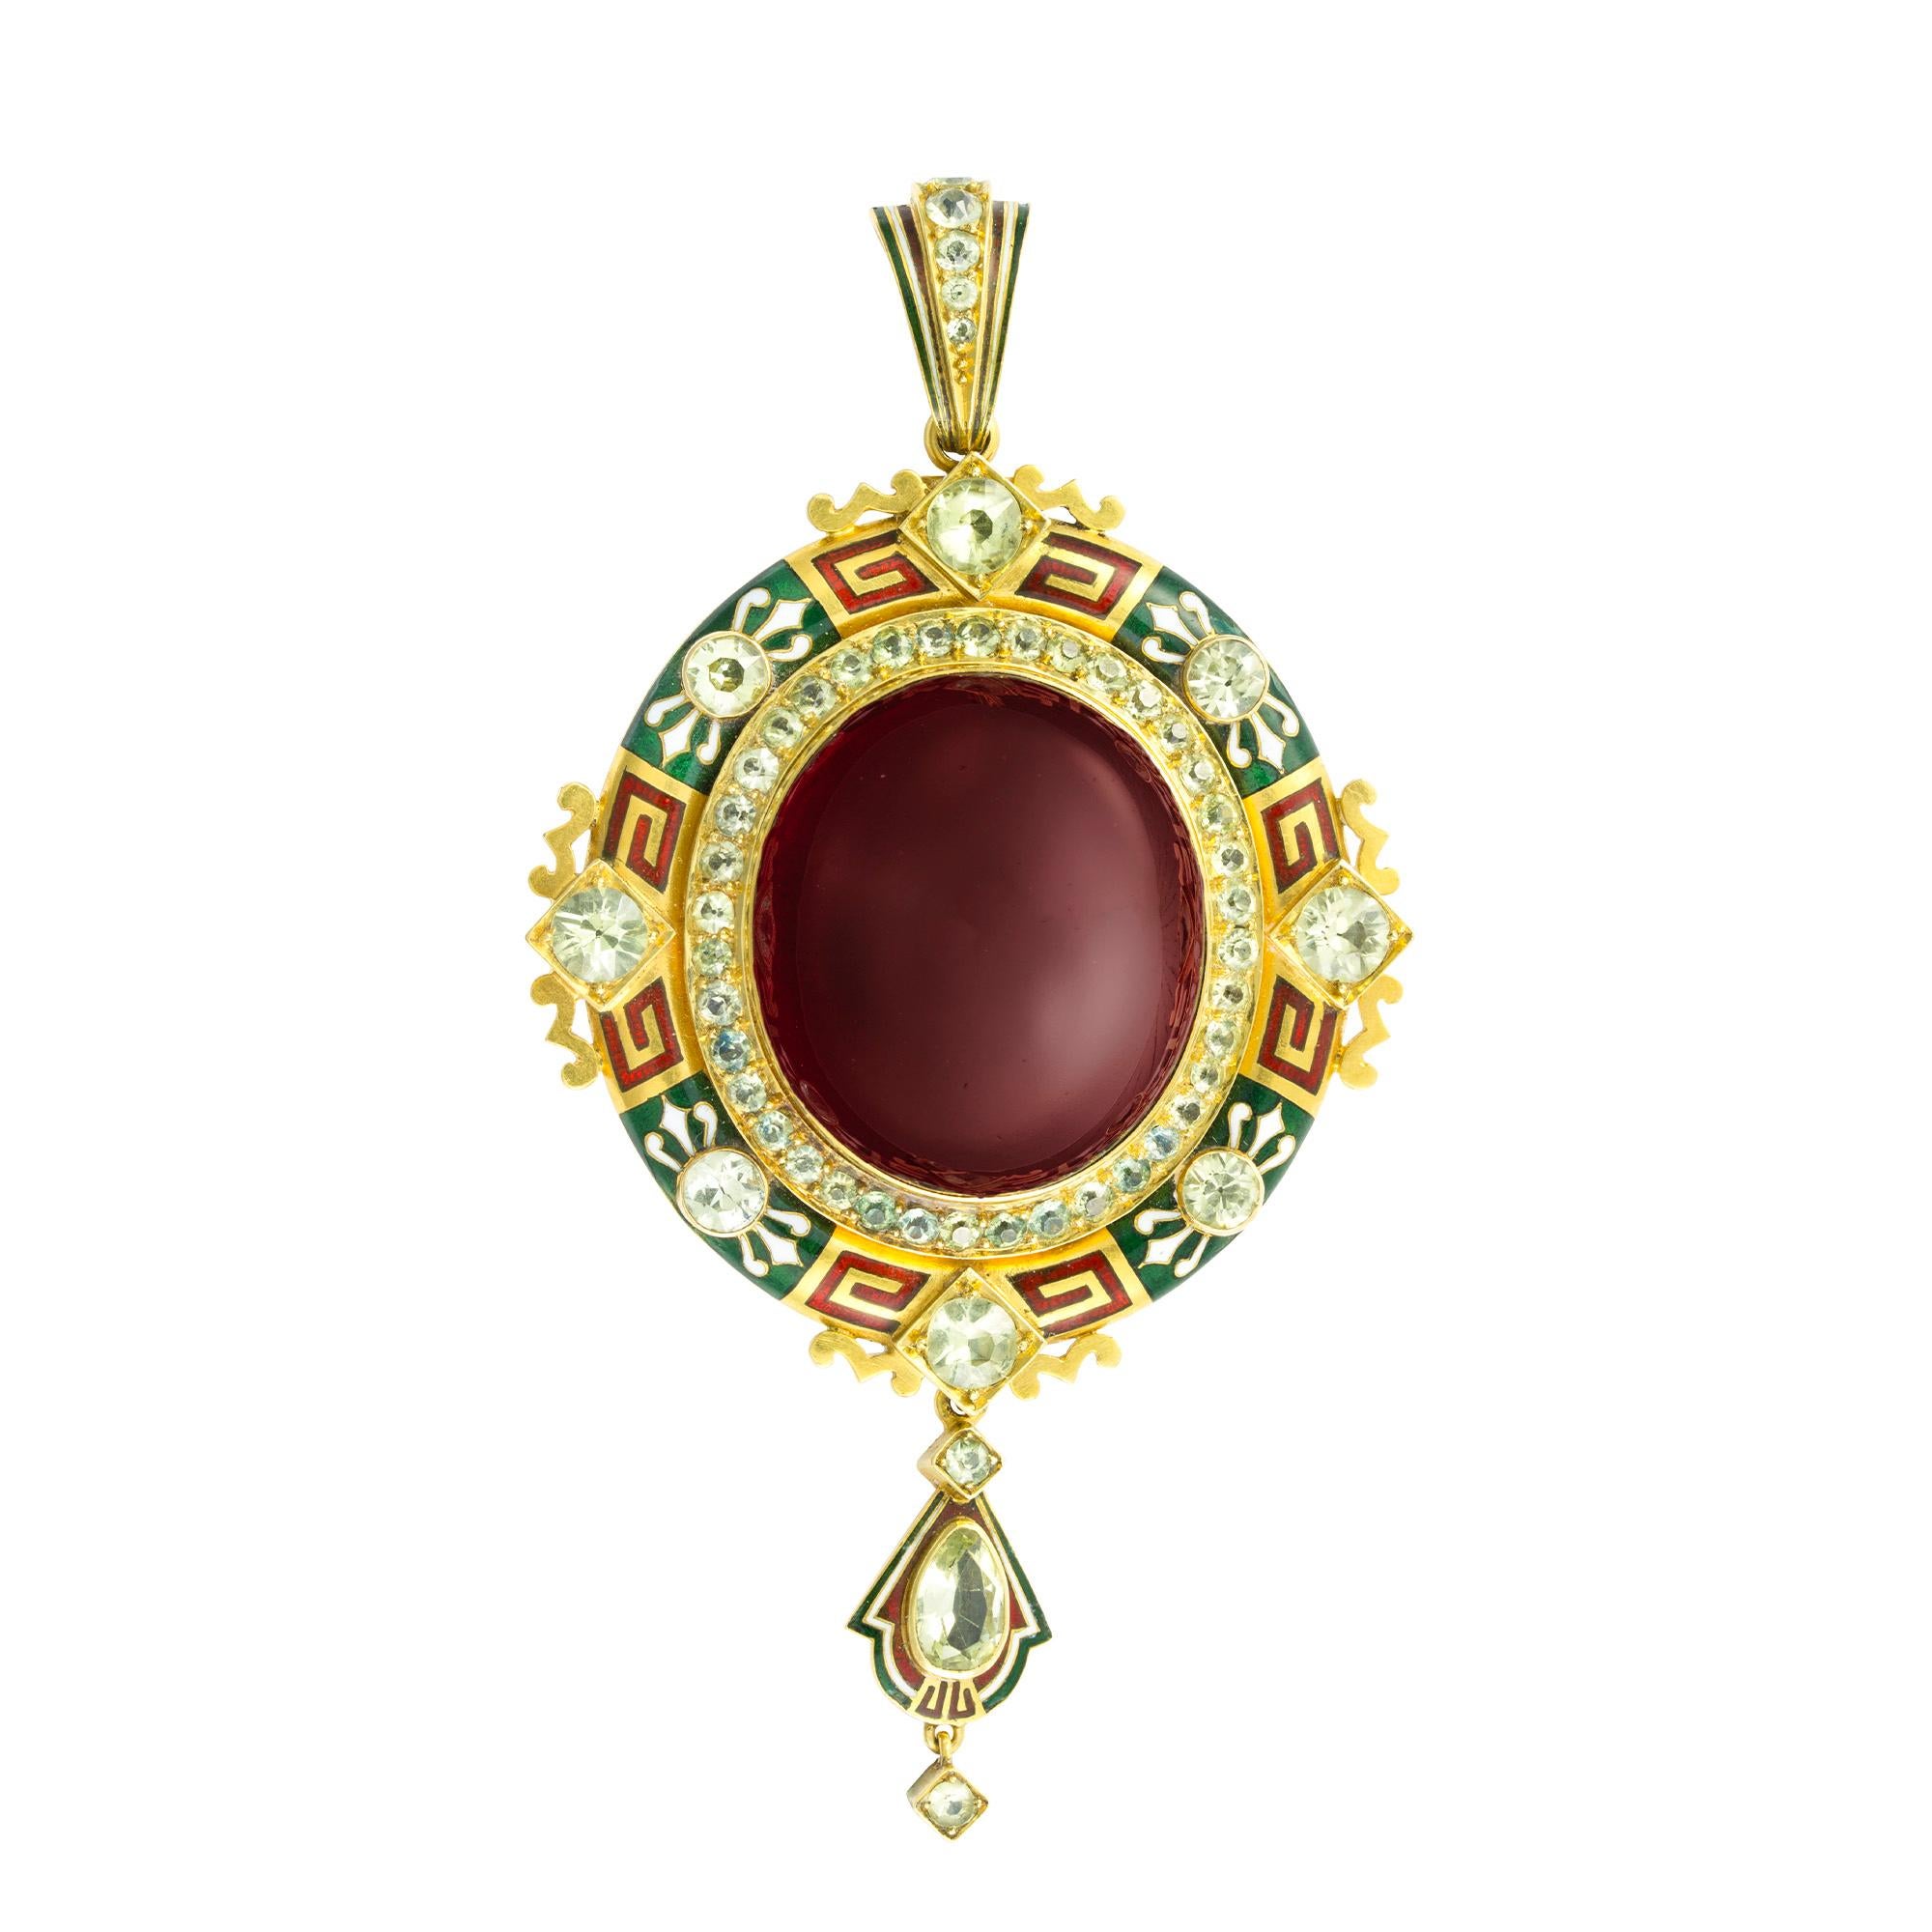 An important Holbeinesque garnet and enamel pendant, the large oval carbuncle garnet surrounded by a border of round faceted chrysolite and a further border of eight larger round faceted chrysolites in between a green, white and red enamel